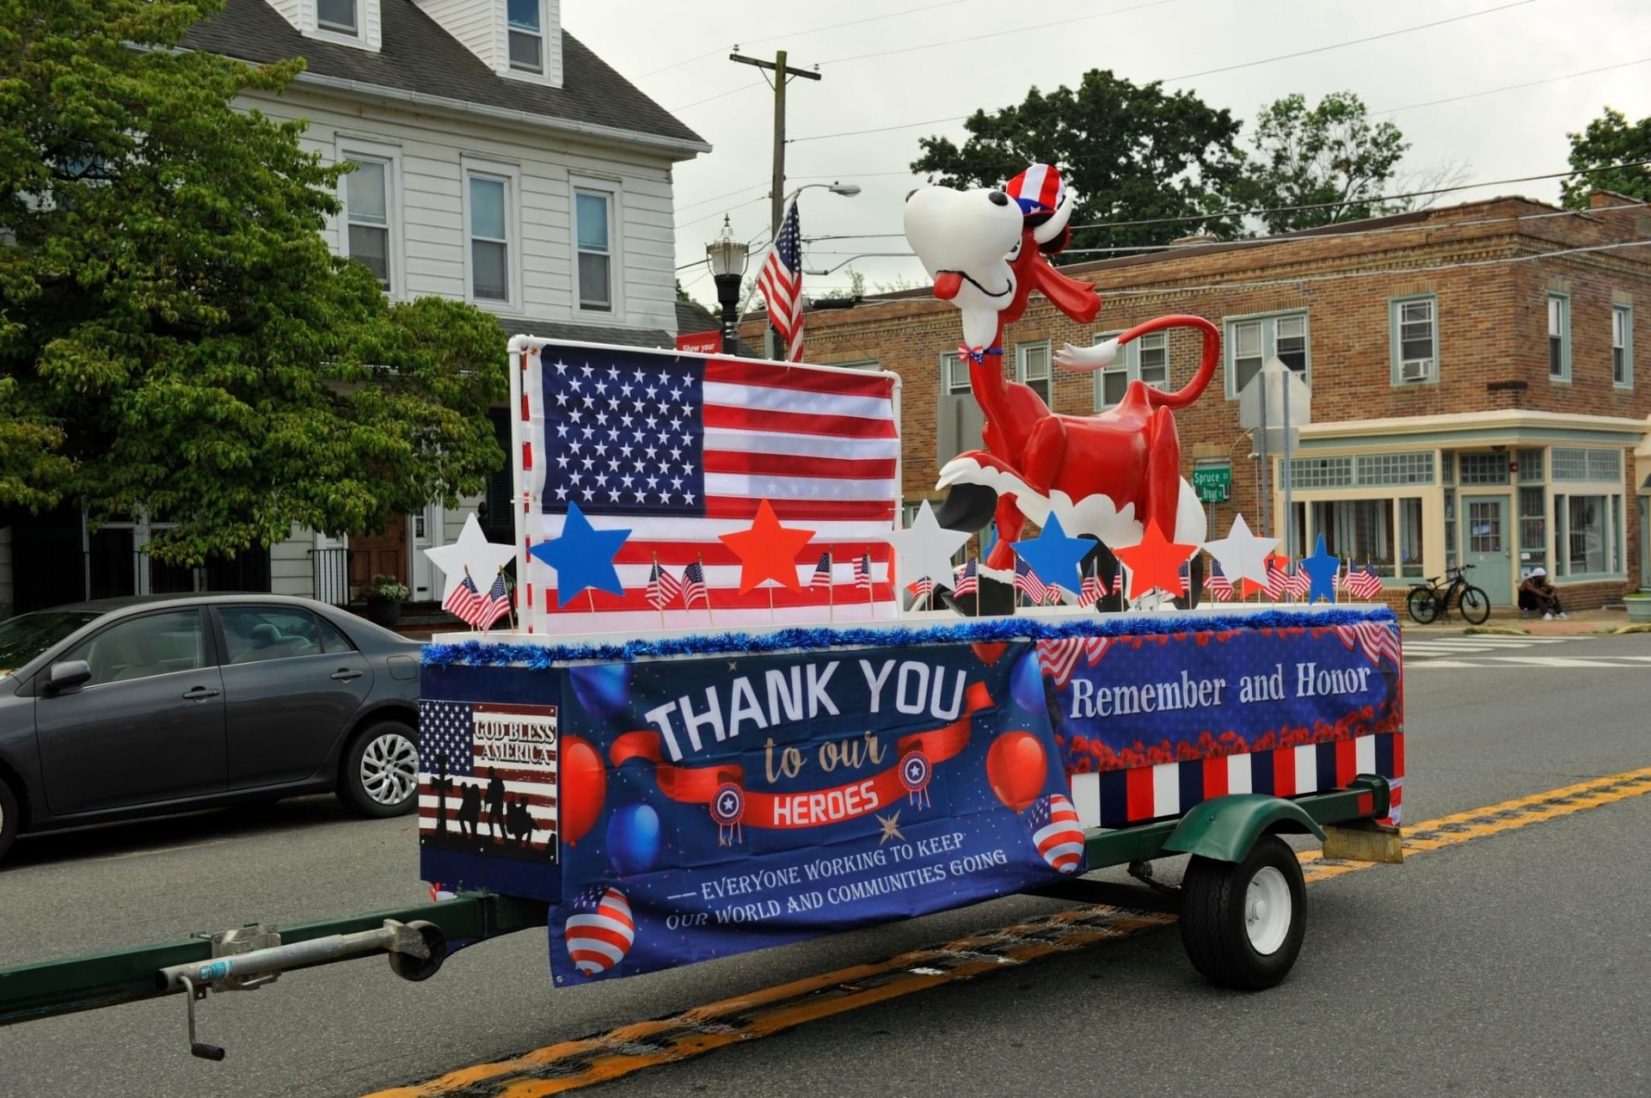 Heritage’s Wins 1st Place at Paulsboro’s Annual 4th of July Parade